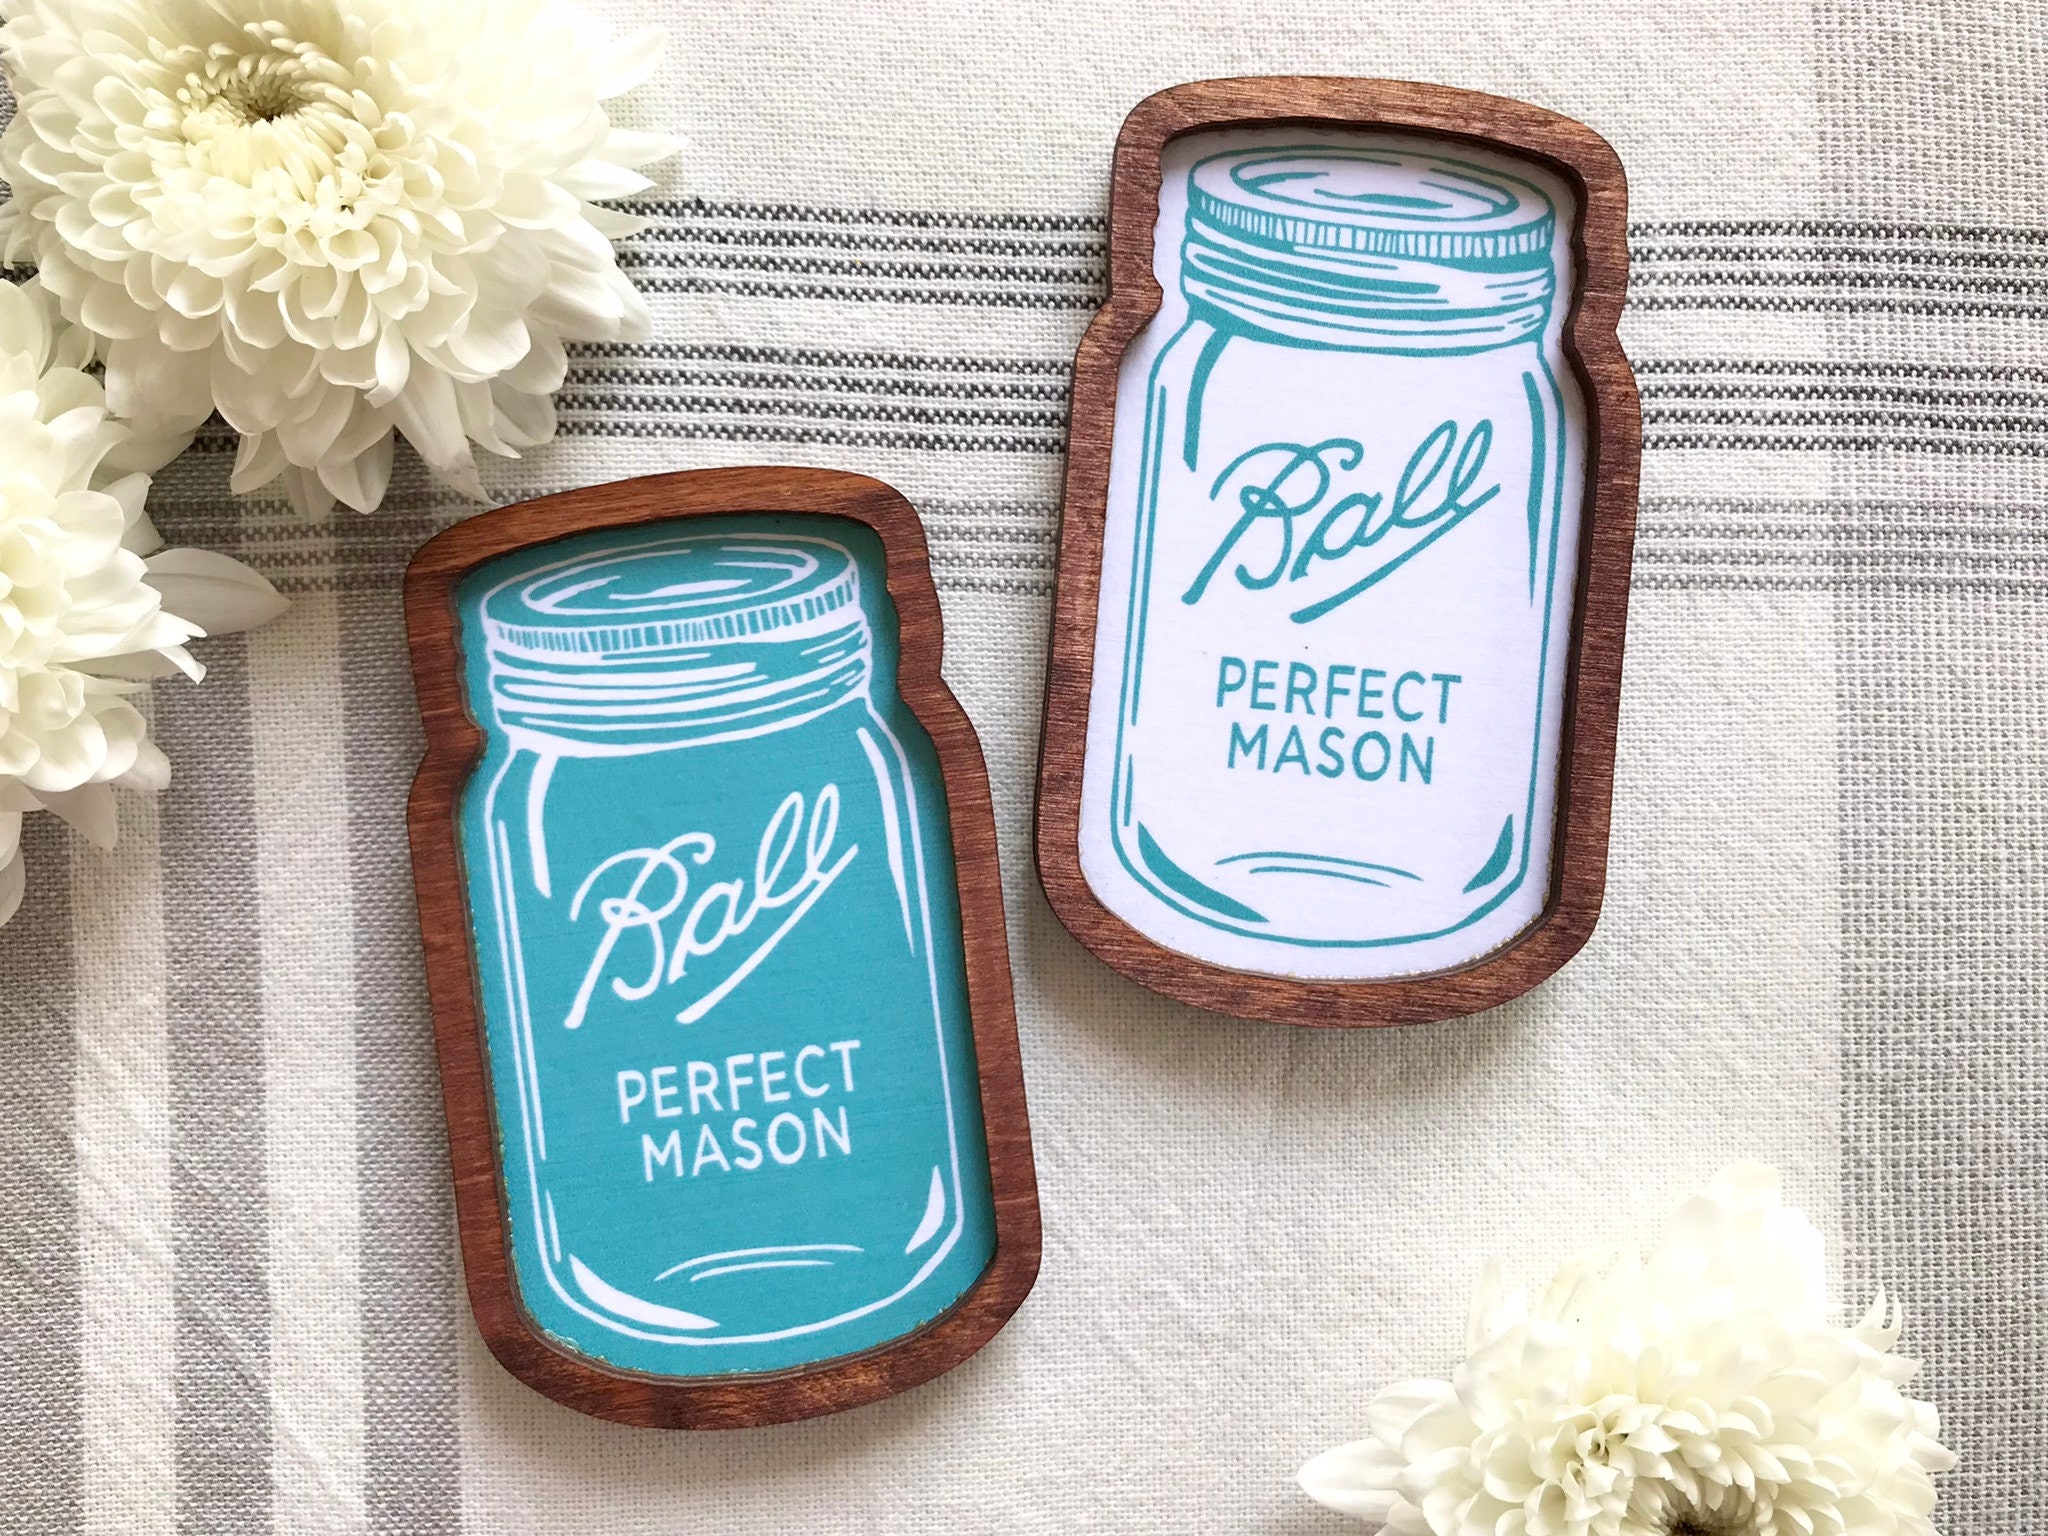  Mason Jar Sign 8 x 4-4/5-inch, Pack of 3 Wooden Cutouts  Unfinished, Mason Jar on Wood for Wood Burning Projects & Decor, by  Woodpeckers